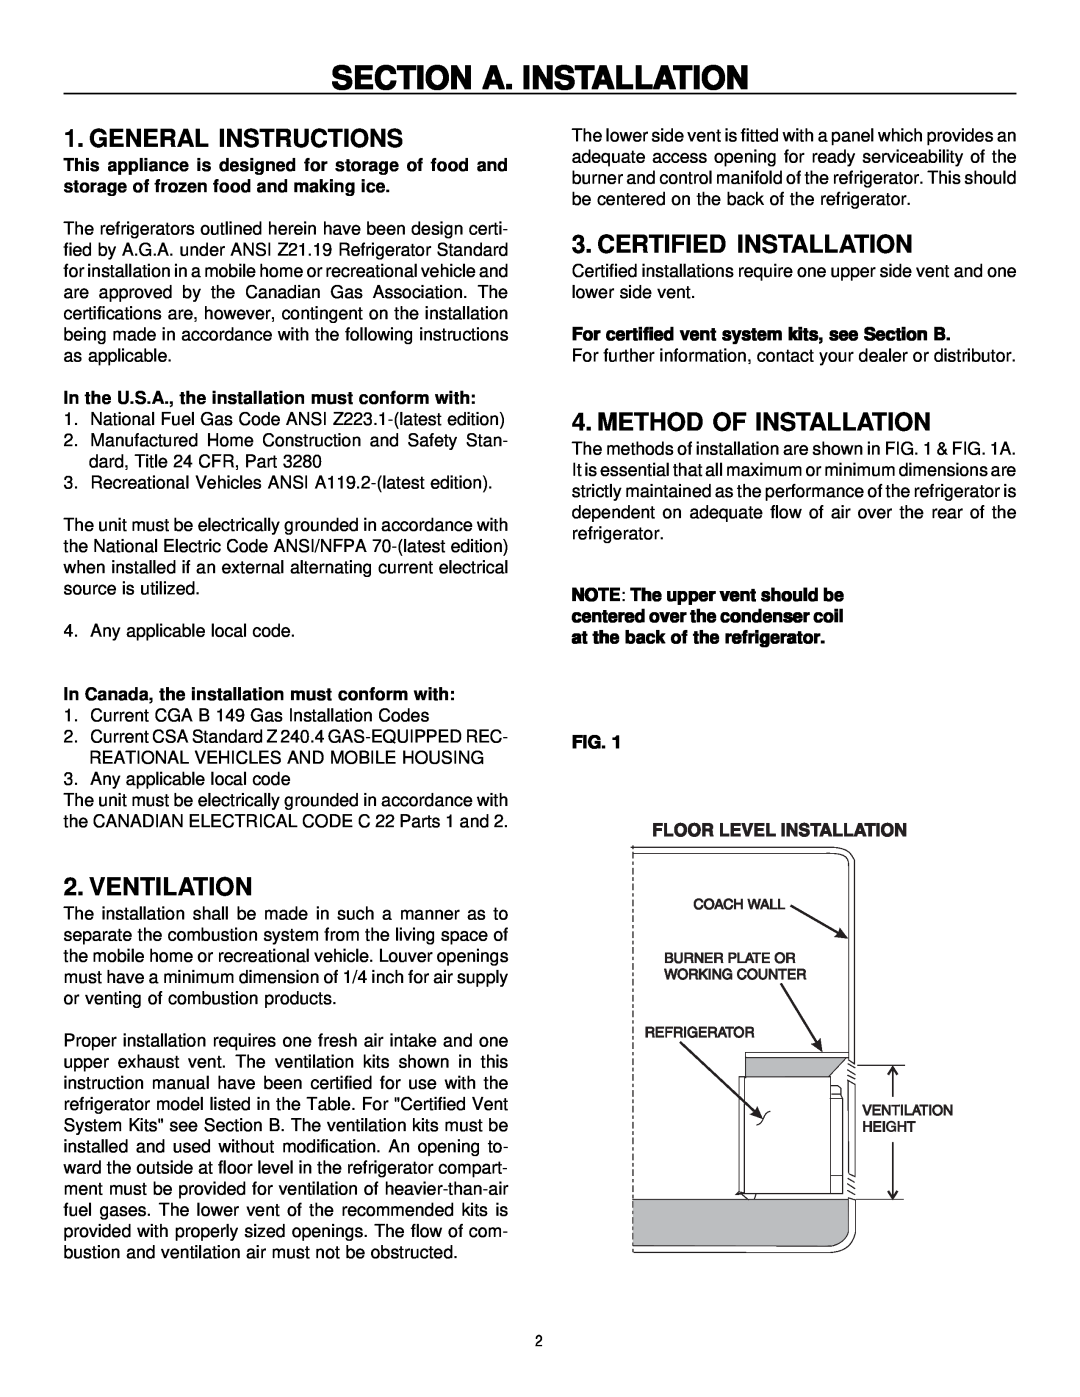 Dometic RM2193 Section A. Installation, General Instructions, Ventilation, Certified Installation, Method Of Installation 